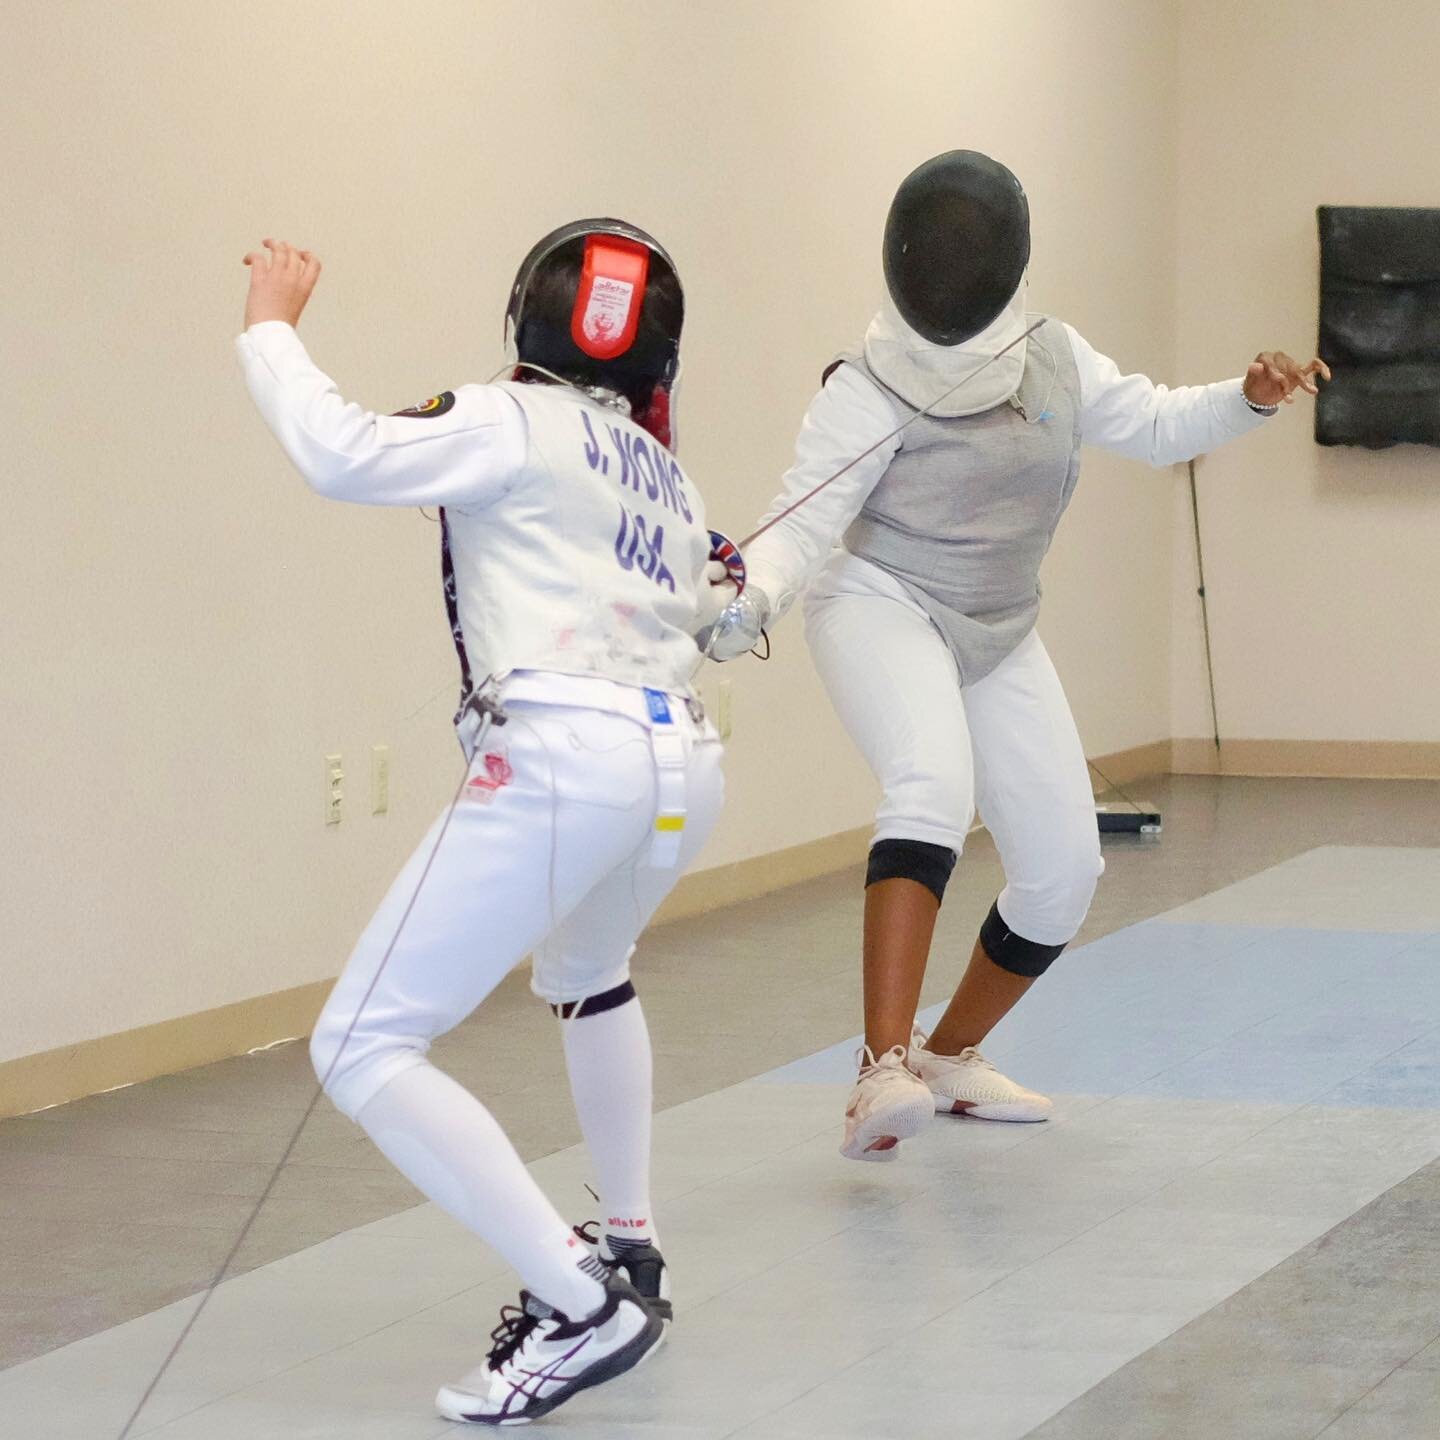 More MAF Friday night highlights. 
. 
.
.
.
. 

#manchenfencing  #sport #athlete #fencing #foil #duel #sportphotography #fencingmask #fencingblade #fencingclub #competition #manchenfridaynight #usafencing #usfencing